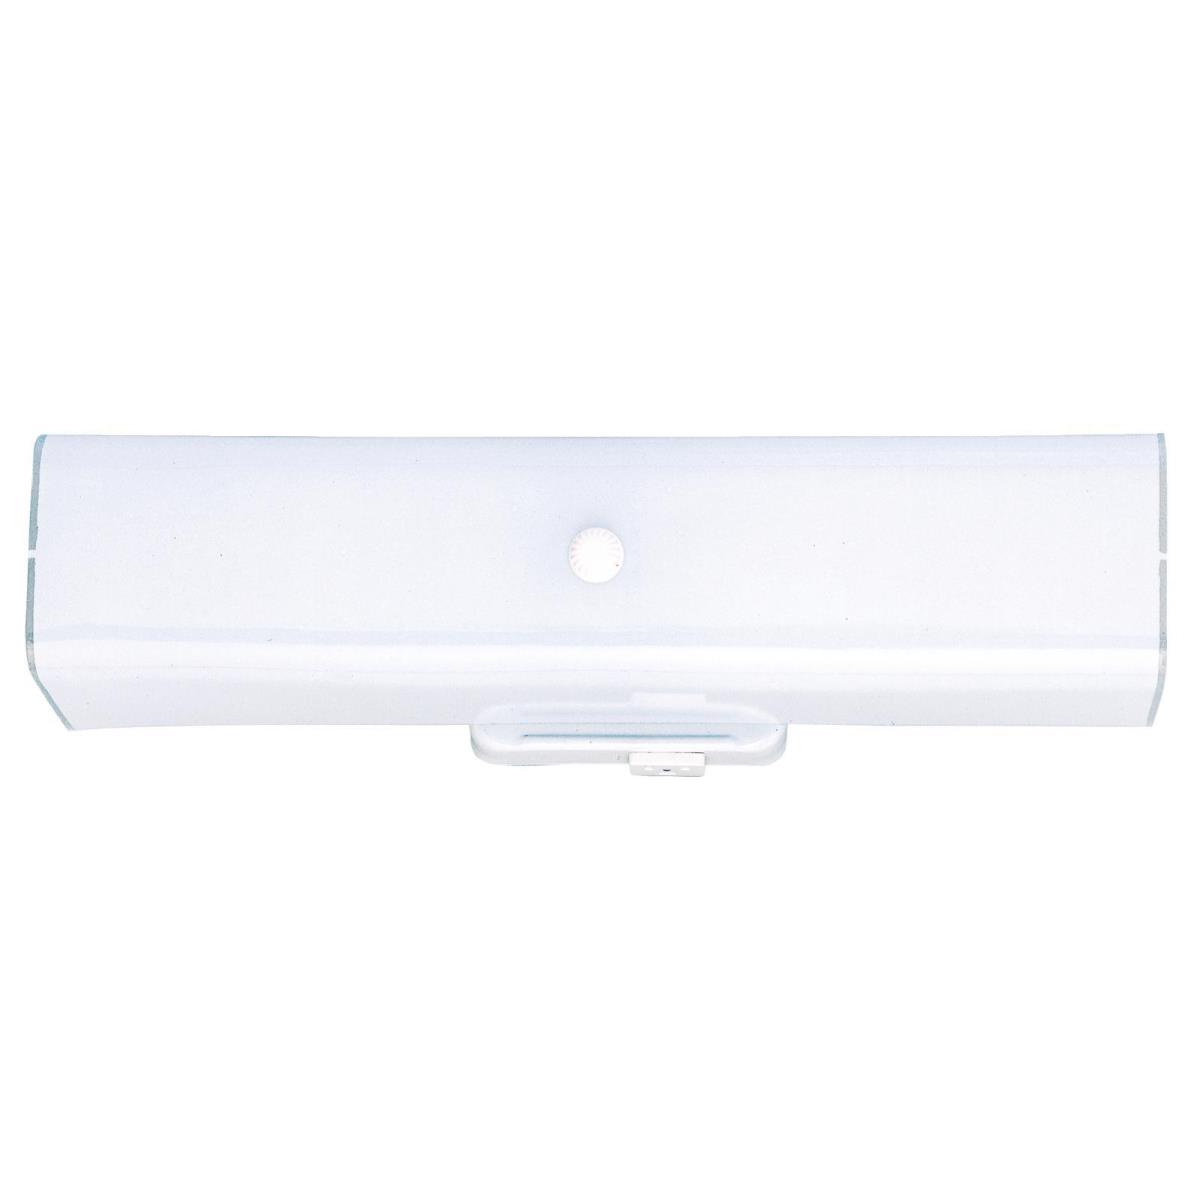 2 Light Wall with Ground Convenience Outlet White Finish Base with White Ceramic Glass